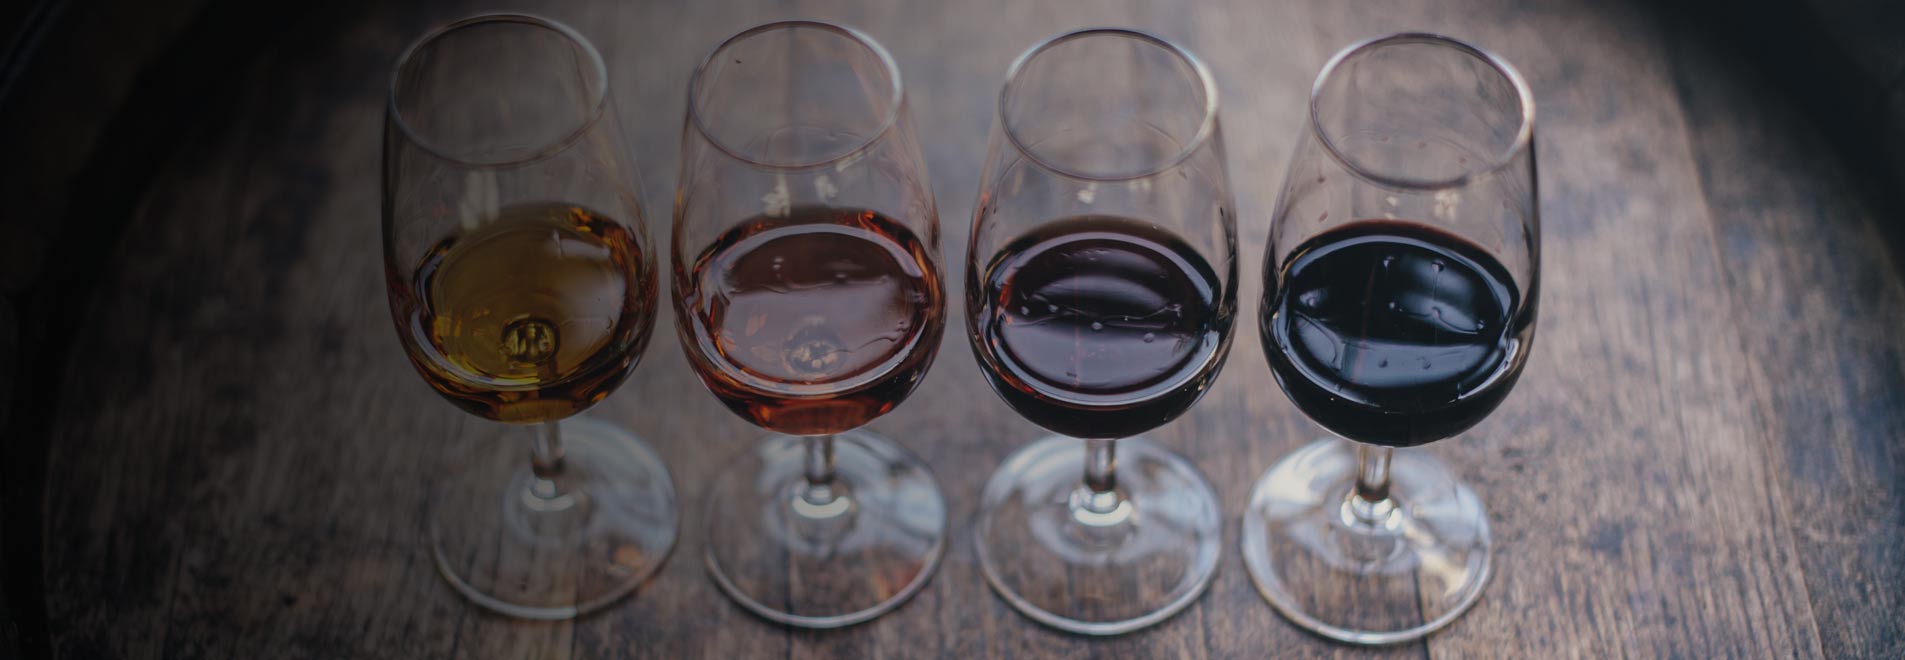 Brandy ageing: which varieties of Sherry wines are necessary?